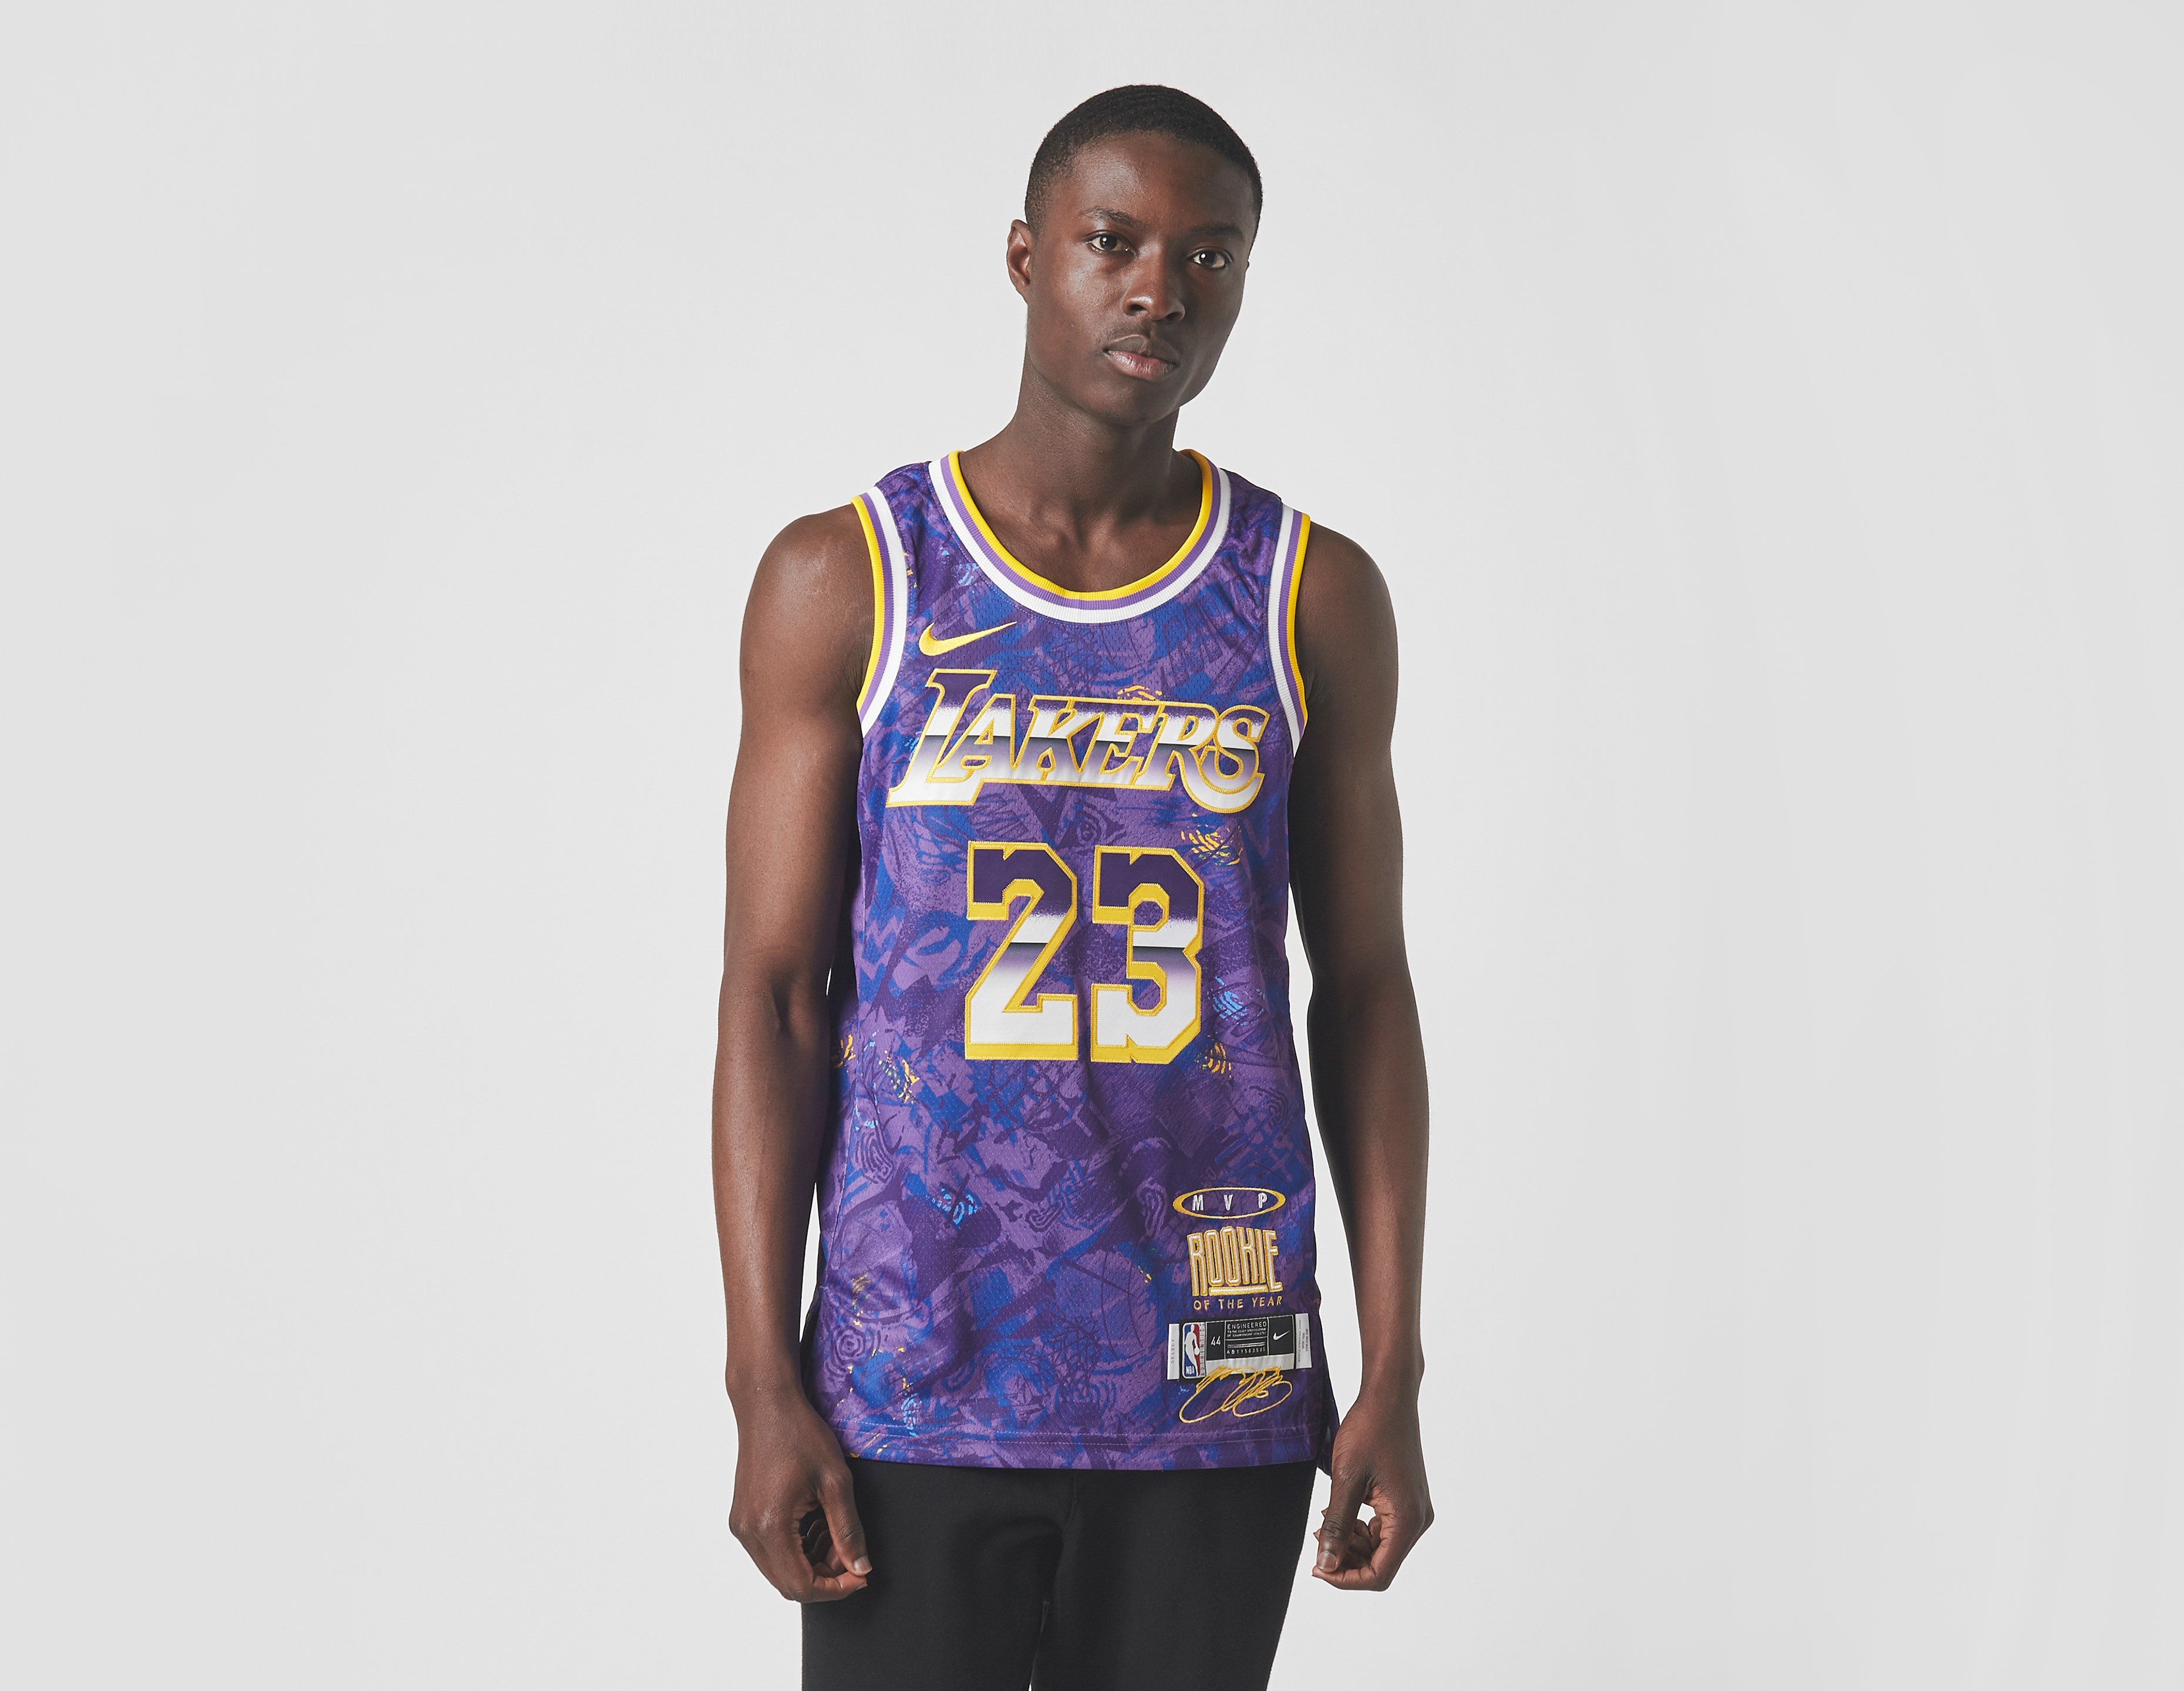 A complete guide to Nike NBA jerseys featuring Nike NBA jersey